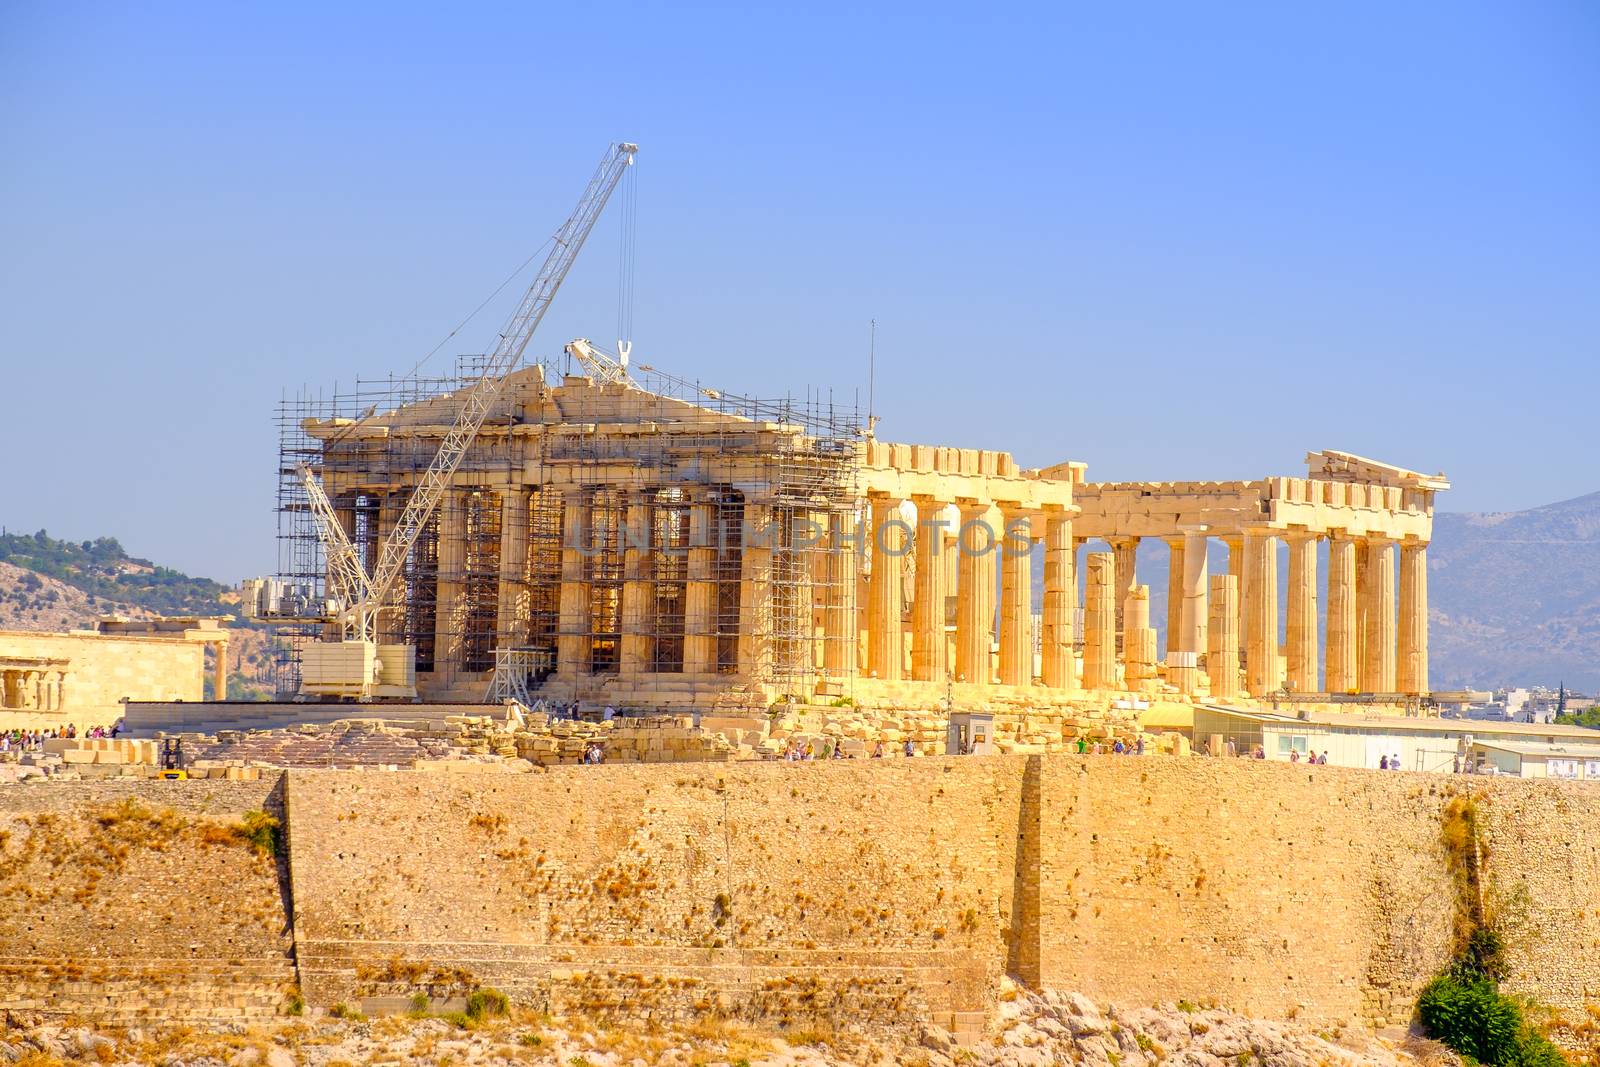 Scenic view of ancient Pantheon temple in Acropolis under constr by martinm303